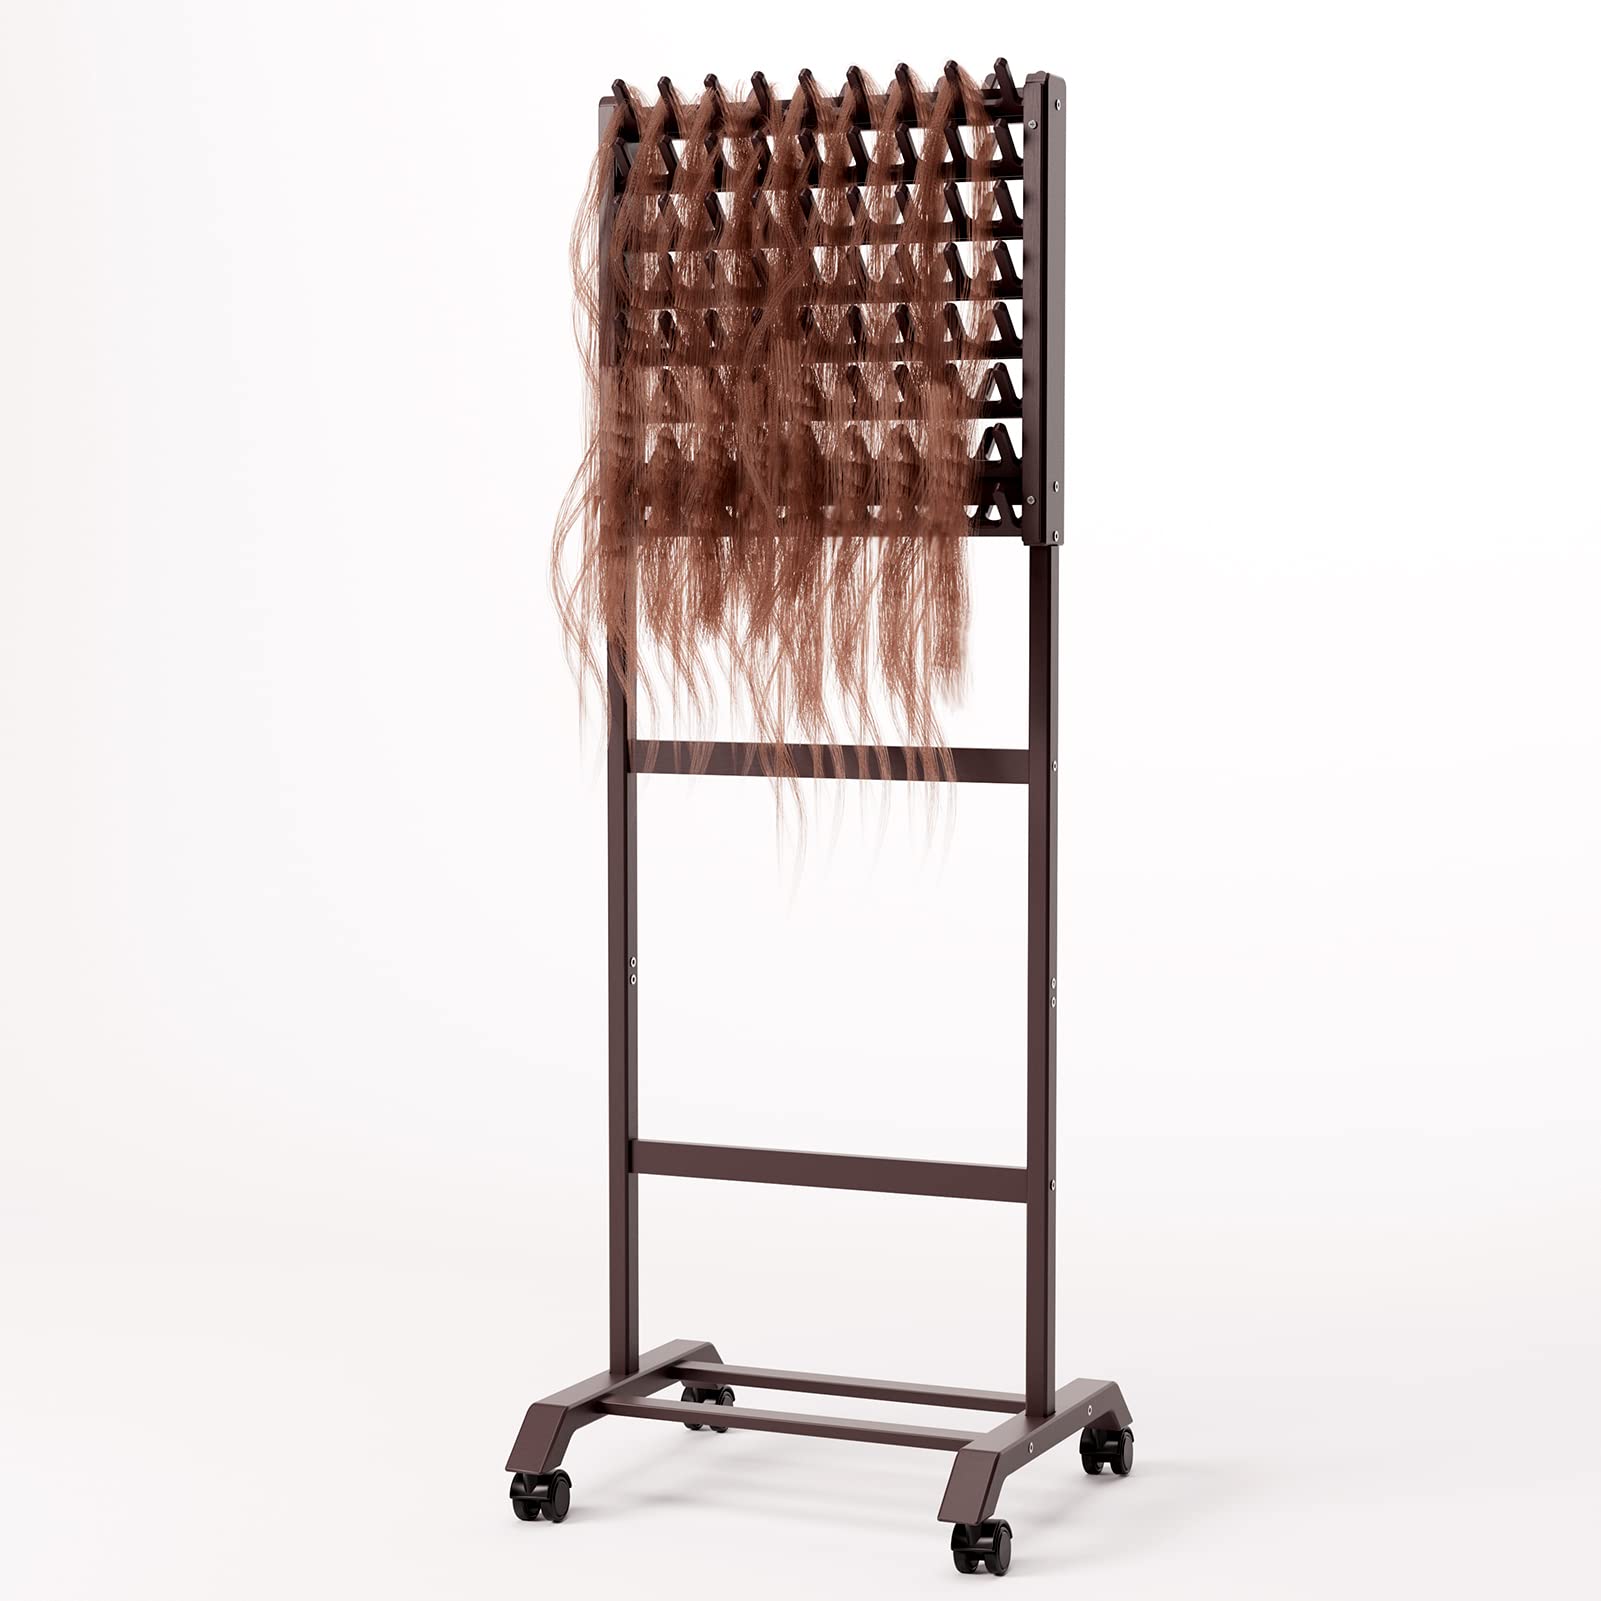 Braid Rack Extension Holder For Styling Standing Or Wall Mounted